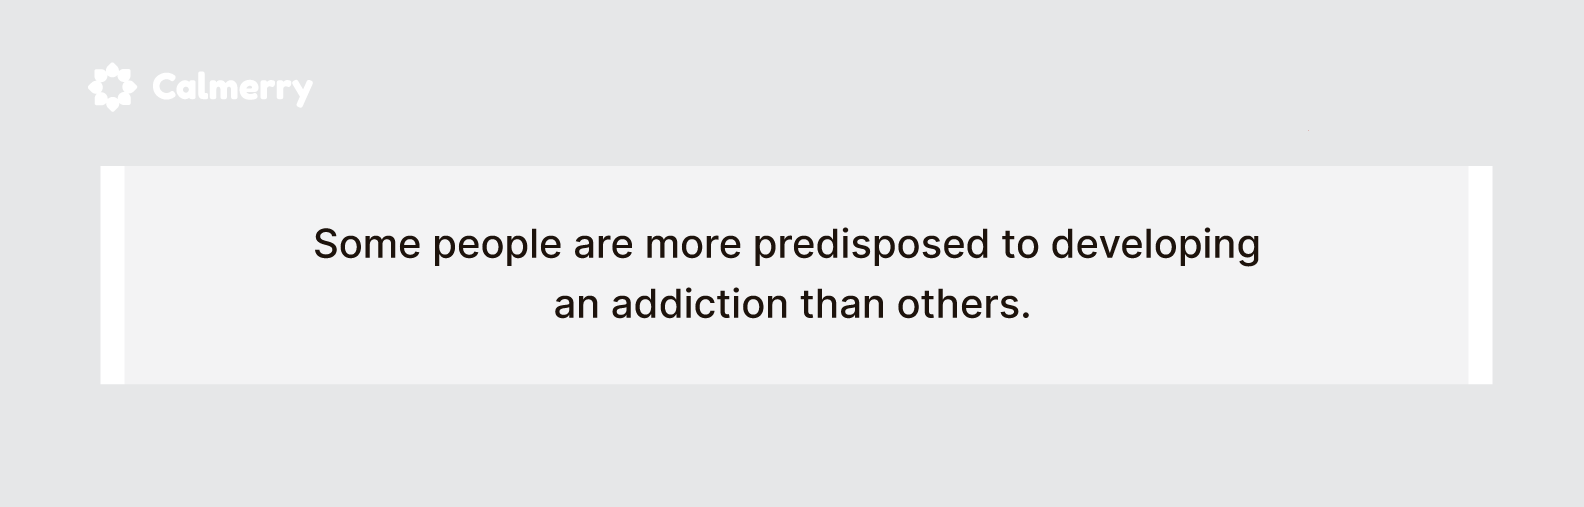 Some people are more predisposed to developing an addiction than others